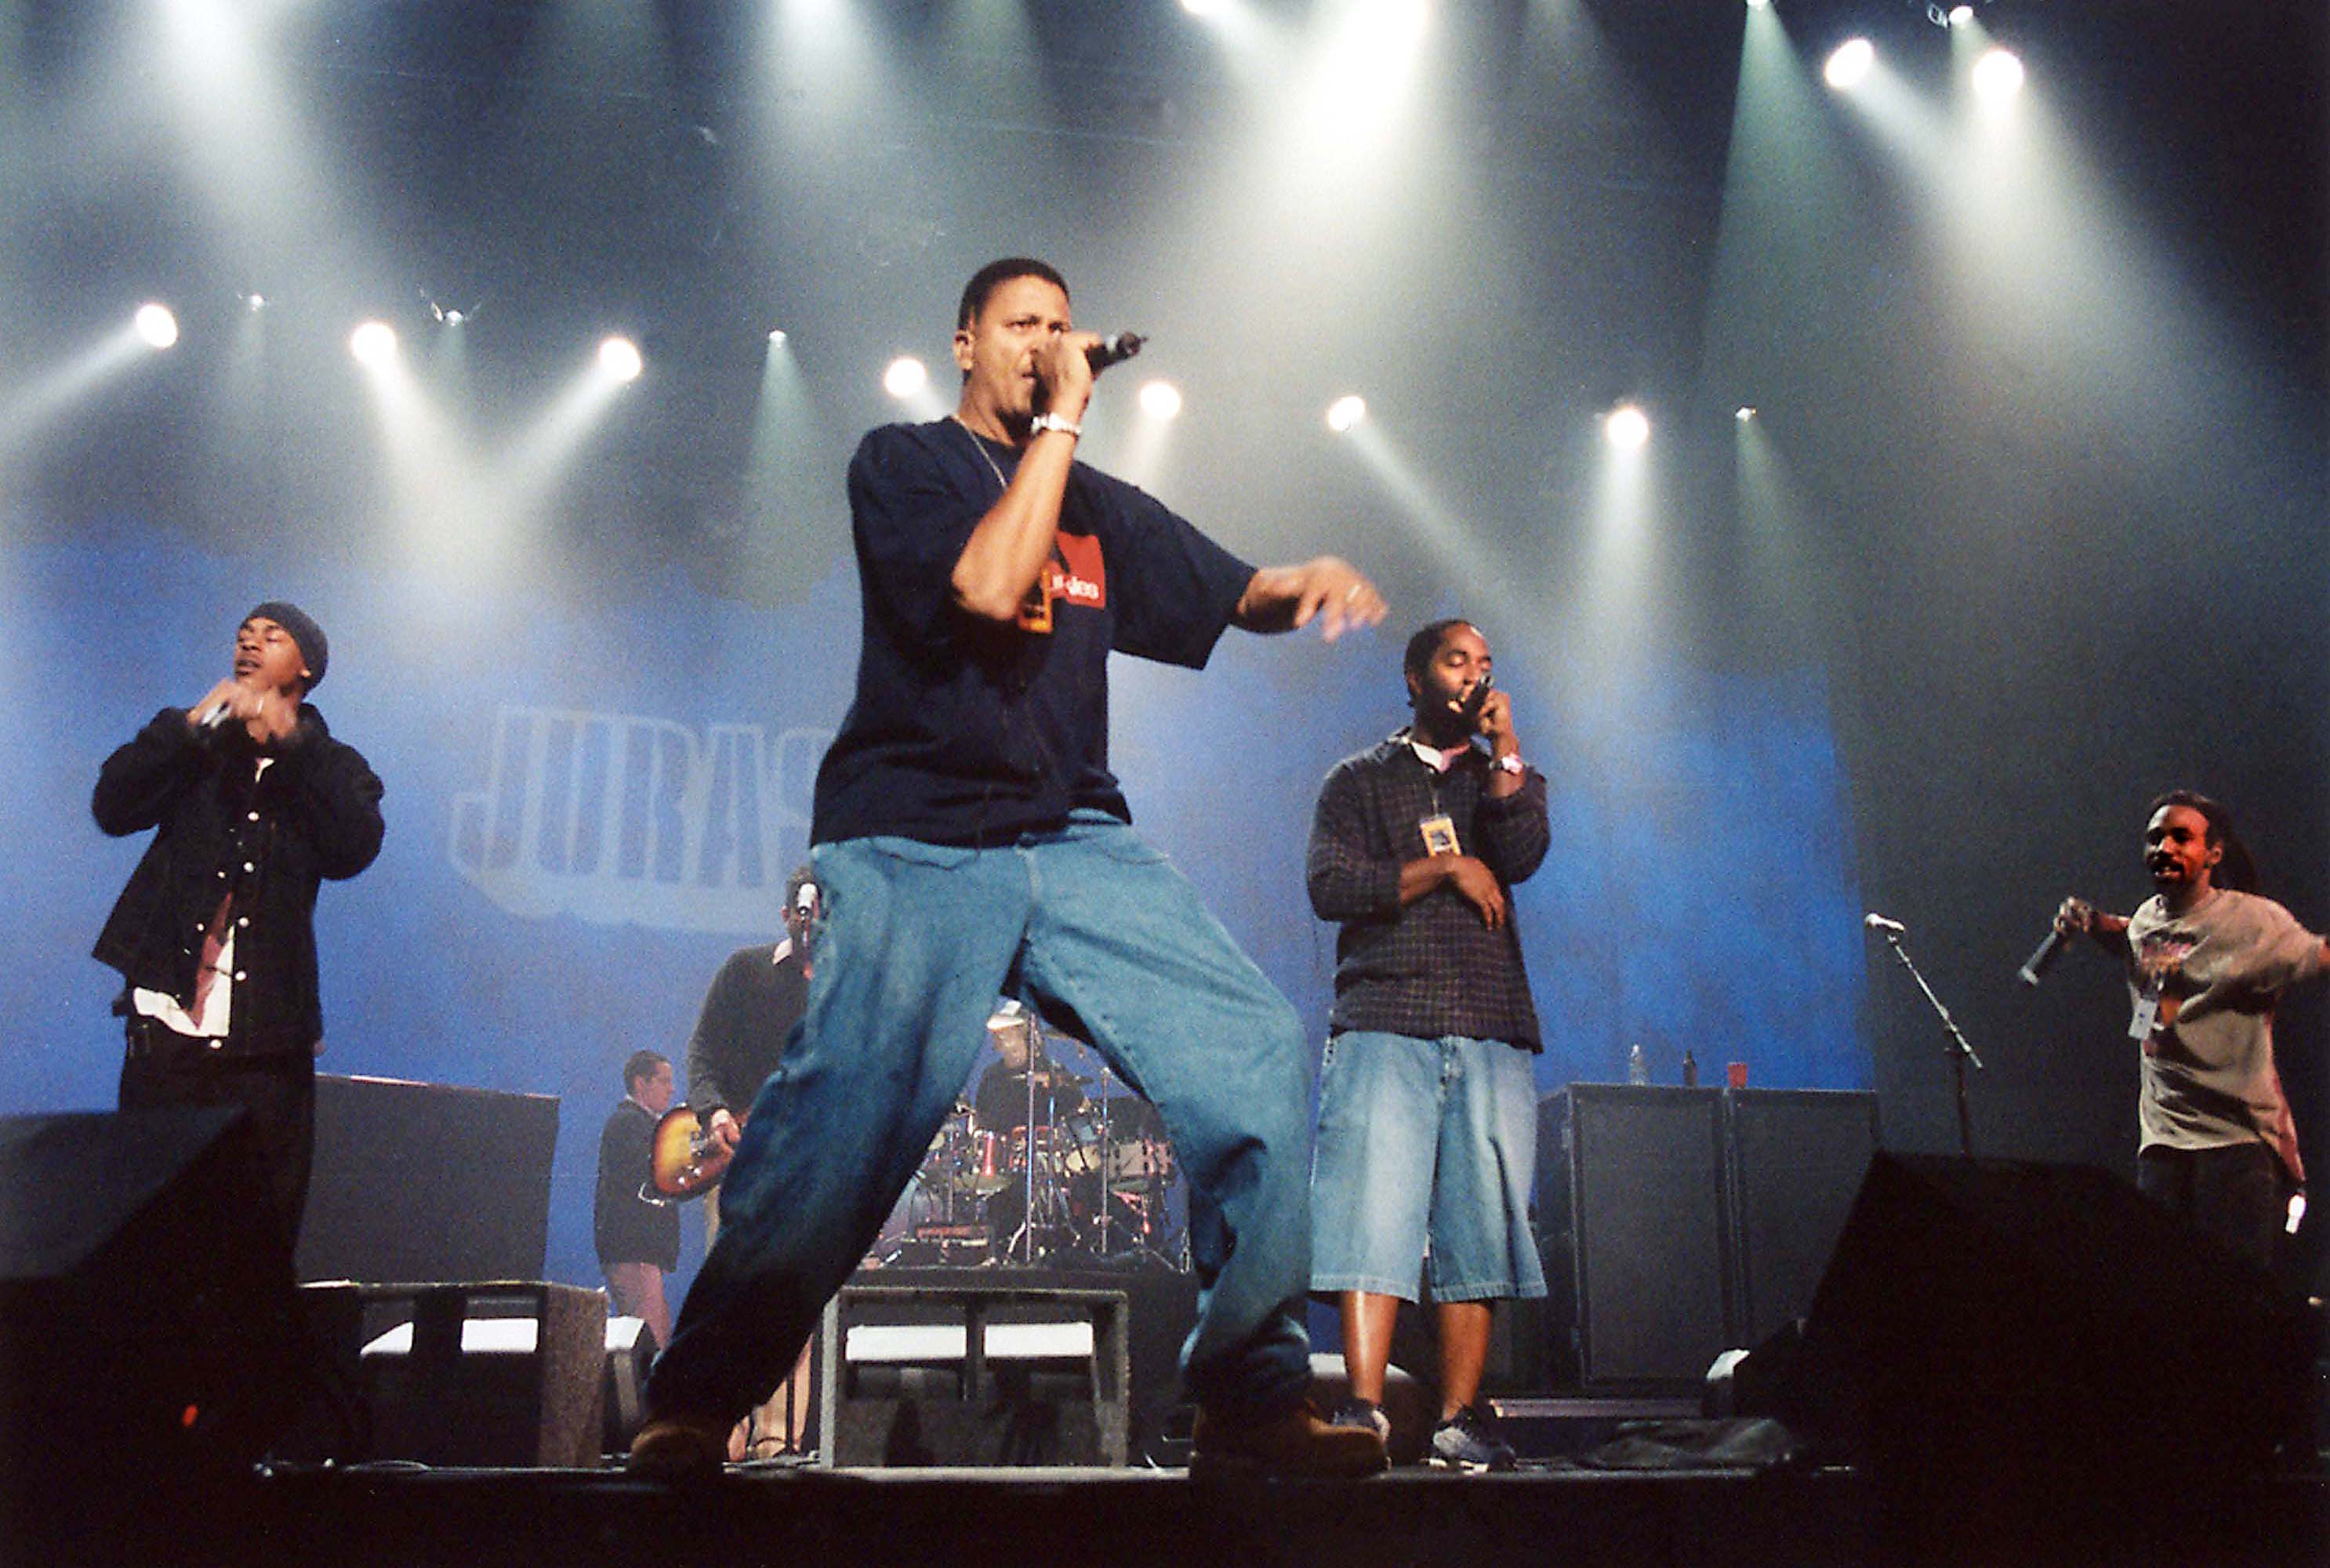 Great Expectations: An Oral History of Jurassic 5's <i></noscript>
<h2></h2>
<h2><strong>Reception</strong></h2>
<p> </p>
<p><strong>Dan Dalton:</strong> There was a lot of pressure on whether or not we were going to change. That I remember. We answered the calling and nobody bailed. Nobody thought we sold out. We were still Jurassic 5, just with better distribution and a better team.</p>
<p><strong>Cut Chemist:</strong> We wanted to do it our way and this was the result, which were better results than most people get from doing it your way on a major record label. I think we may be the shining example, the best-case scenario, of having your cake and kind of eating it, too. The machine got behind it and we had 100% creative control. Usually, when you have 100% creative control they’re like, “Fuck this record,” and they’re not going to work it.</p>
<p><strong>Soup:</strong> It was a slow burn. It didn’t take off. And at that time, first week sales was a big thing. We didn’t place high, but we didn’t place low. I’m looking at Billboard right now. We went to 43 and R&B/hip hop albums we were at 33. We were above 50. It would have been dope if we were like 10 or something, but that wasn’t bad… We just wanted to come out. We didn’t know nothing about first-week sales and we didn’t care anything about that. That was for the record label to worry about.</p>
<p><strong>Cut Chemist:</strong> The weird thing about the success of “Quality Control” is that I could feel the machine behind it. I was like, “This isn’t an organic thing.” It’s not the kind of song that is cracking on the mainstream. Yet it was on mainstream platforms. On Power 106 or 92.3 had “Quality Control” going up against Jay-Z songs. And it was winning. I was like, “What?!” We were on some MTV show. It was on some <i>TRL-type</i> shit. Girls were dancing to “Quality Control” when we were up there performing and I was like, “This is surreal. This is weird. You guys don’t normally dance to shit that sounds like this.” It was cool, but it was so different from what was going on at the time.</p>
<p><strong>B+:</strong> There’s a lot of Good Lifers out there that would be delighted to point out to you that both Snoop Dogg and Bone Thugs-N-Harmony came through. But as far as groups that were concerned with the core tenets of The Good Life, I think it’s a fair point to be made that Jurassic had the most successful career.</p>
<p><strong>Marc 7:</strong> We’re still seeing residuals from the record to this day, so it’s doing alright. We were so busy. We toured for years. There’s not many groups that can go silent, go dark for five or six years and come back and just tour like nothing ever happened. We’re one of those groups that can do that.</p>
<div class=